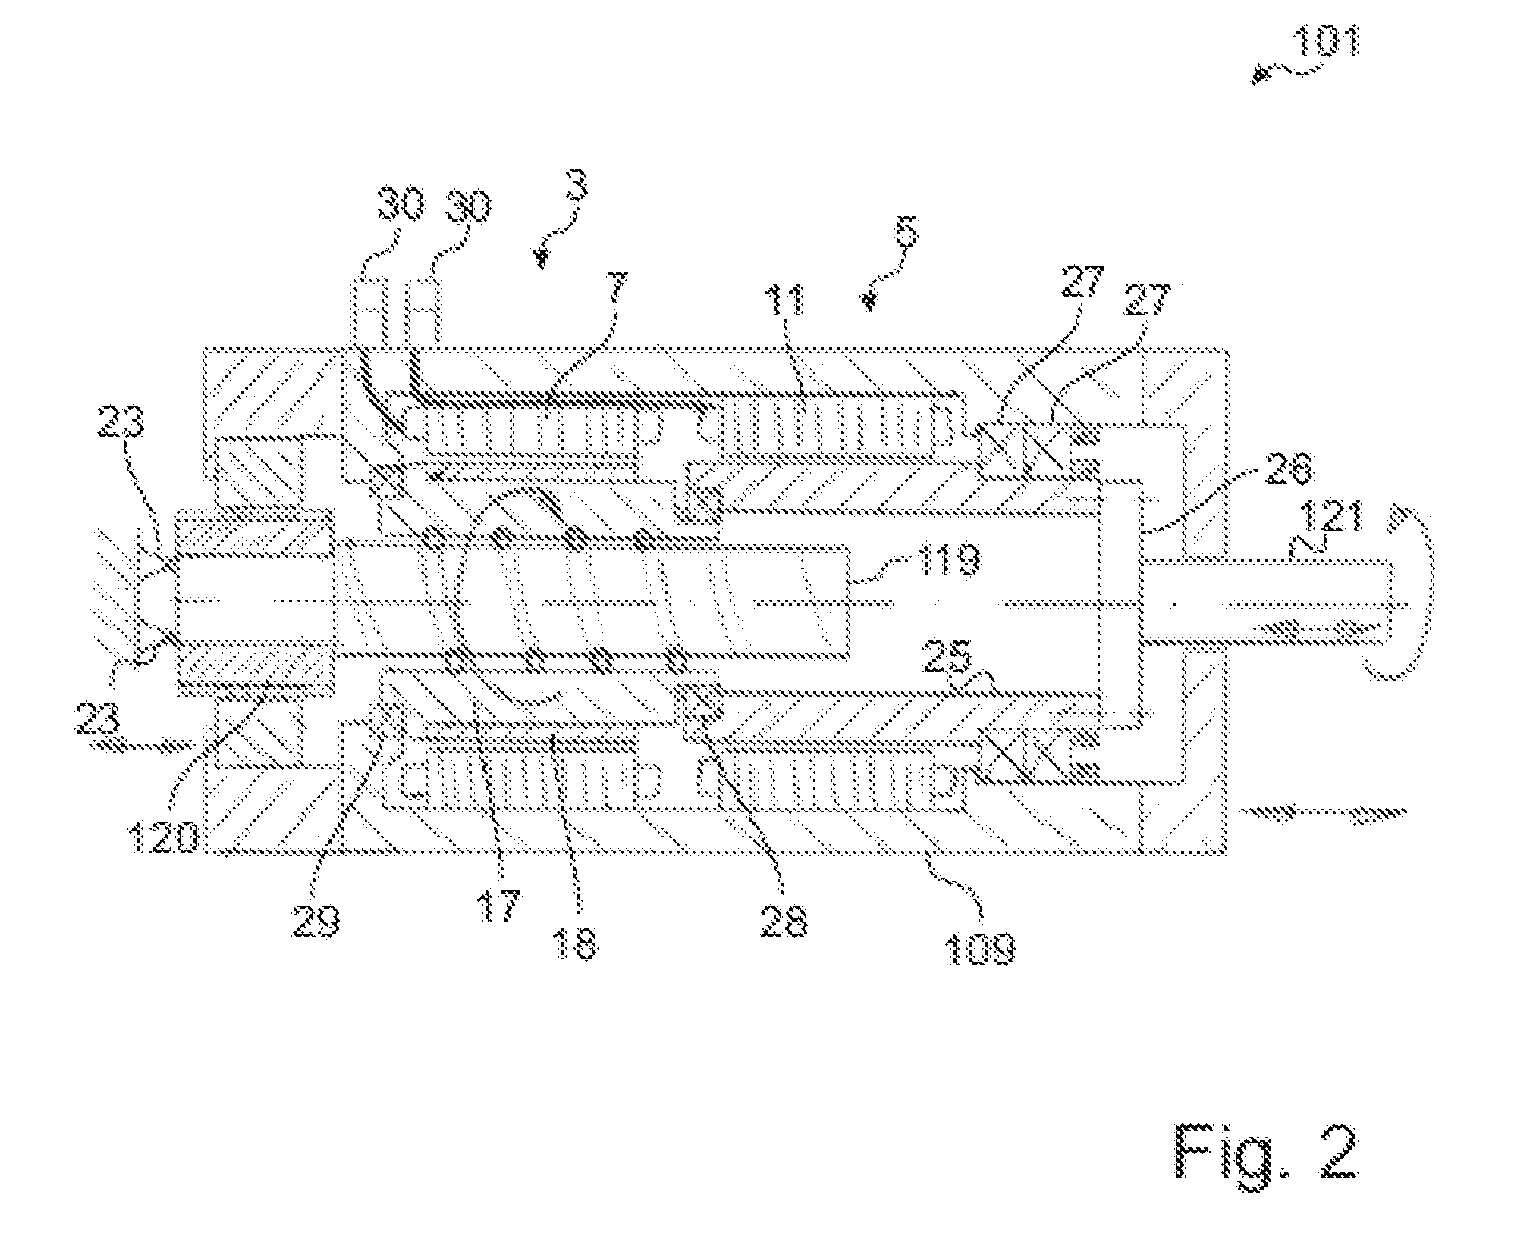 Drive apparatus for driving a worm of an injection molding machine